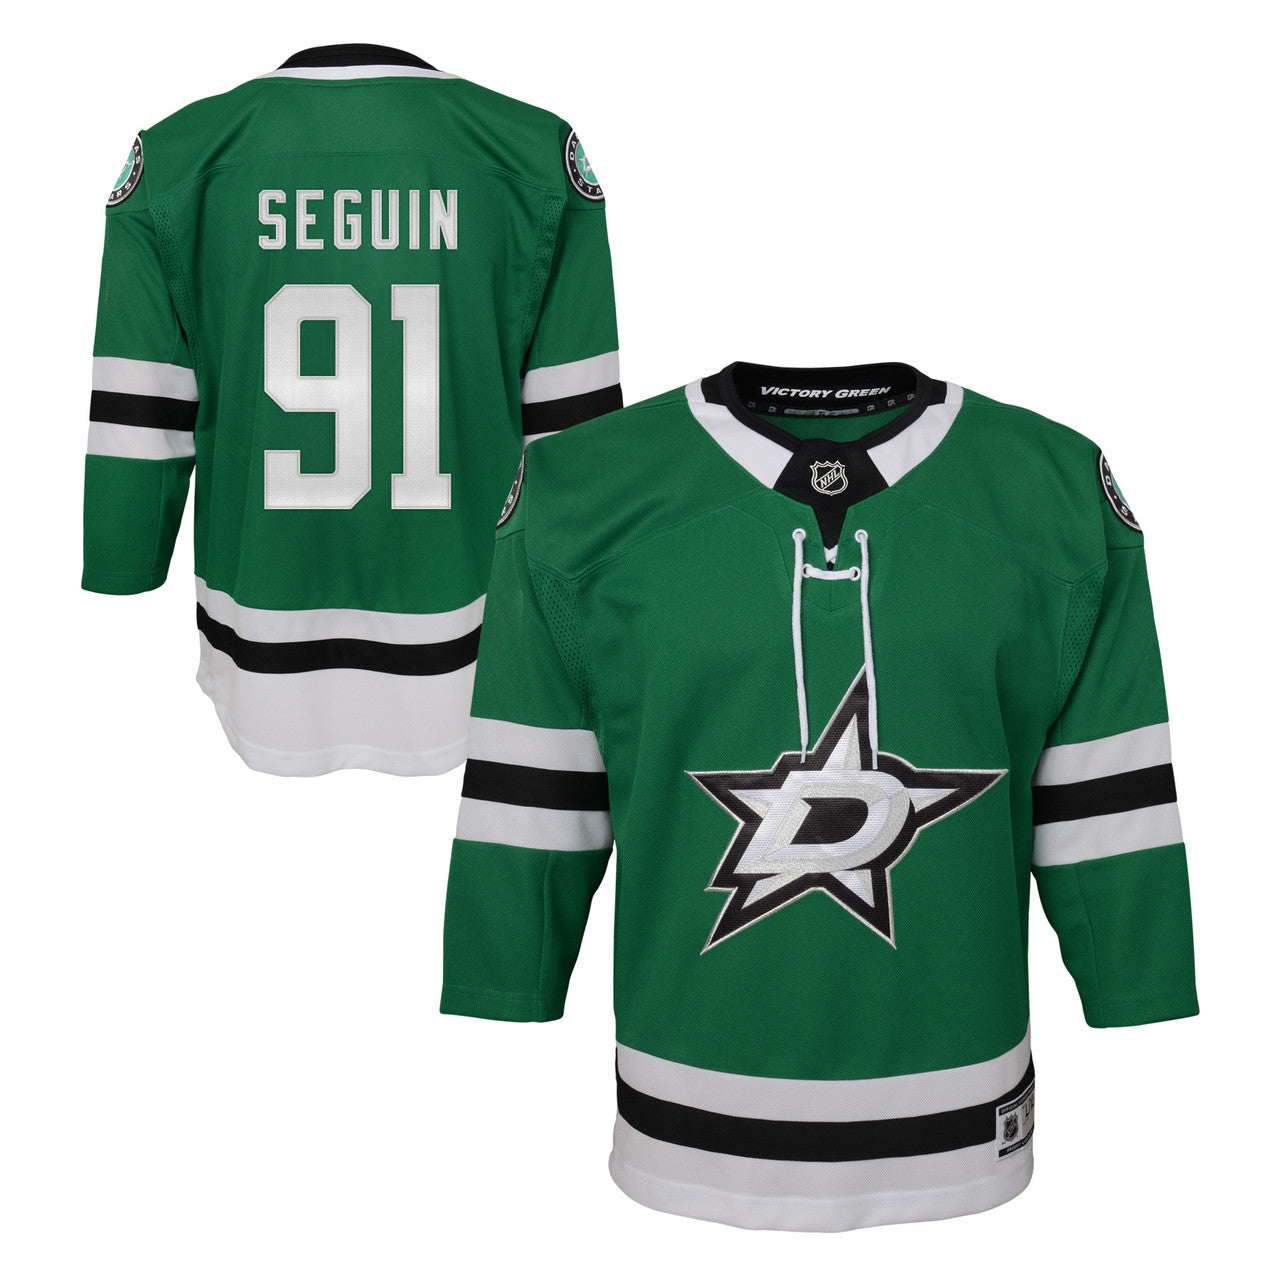 Dallas Stars Youth Outerstuff Tyler Seguin Premier Jersey in Green - Front and Back View